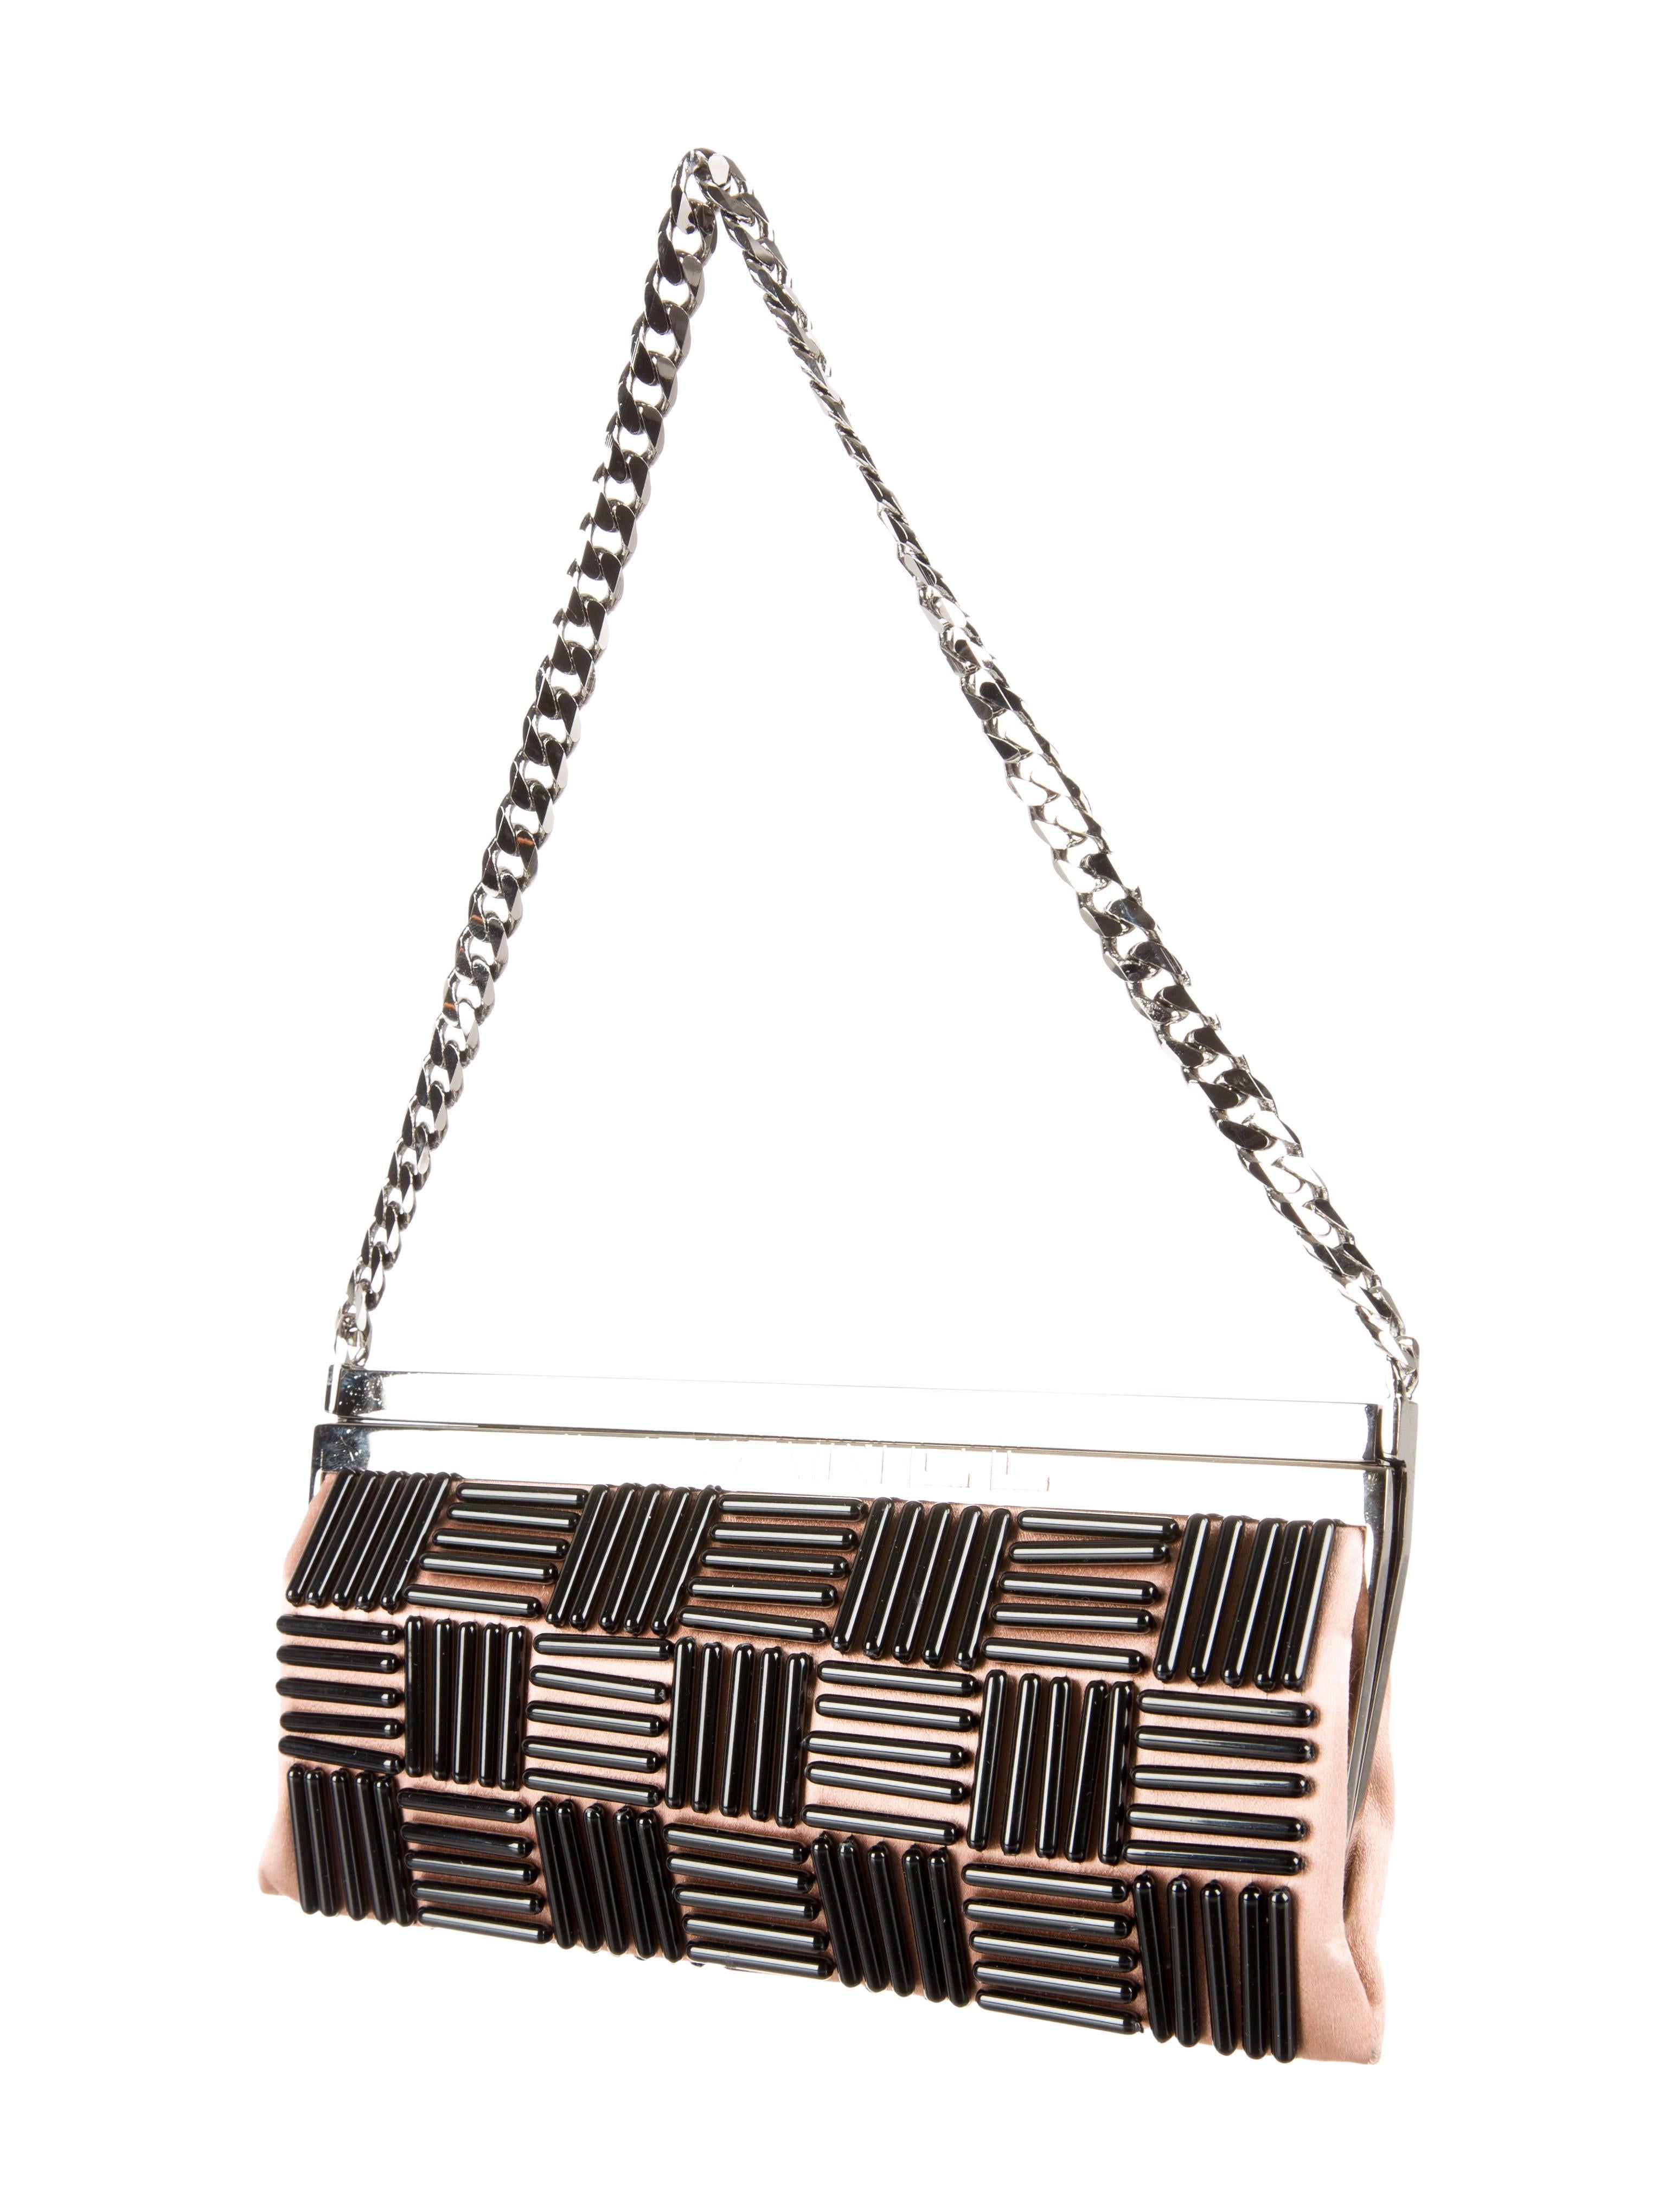 CURATOR'S NOTES

You are sure to dazzle with this satin and bead embellished Chanel bag dangling from your shoulder or wrist. 

Satin
Beads
Gunmetal hardware
Hinged closure
Date code 8888931
Shoulder strap 8.5